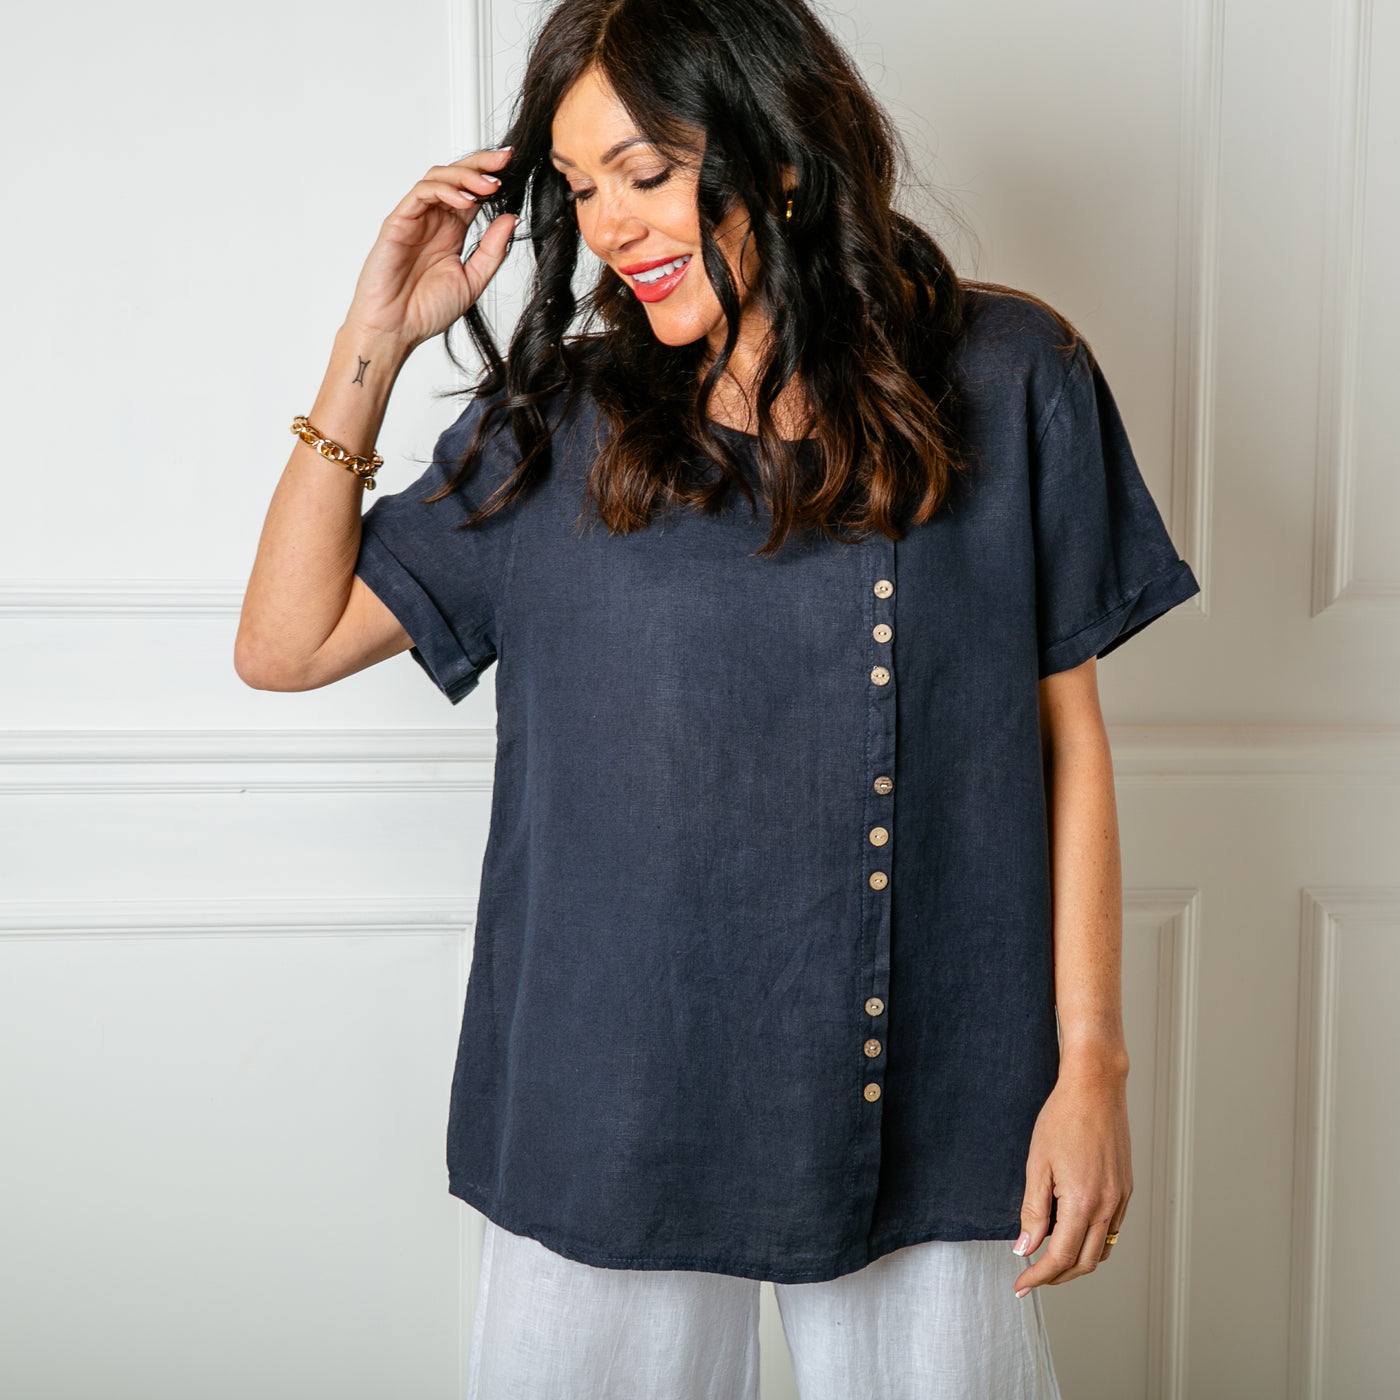 The navy blue Button Down Linen Top with short sleeves and a round neckline